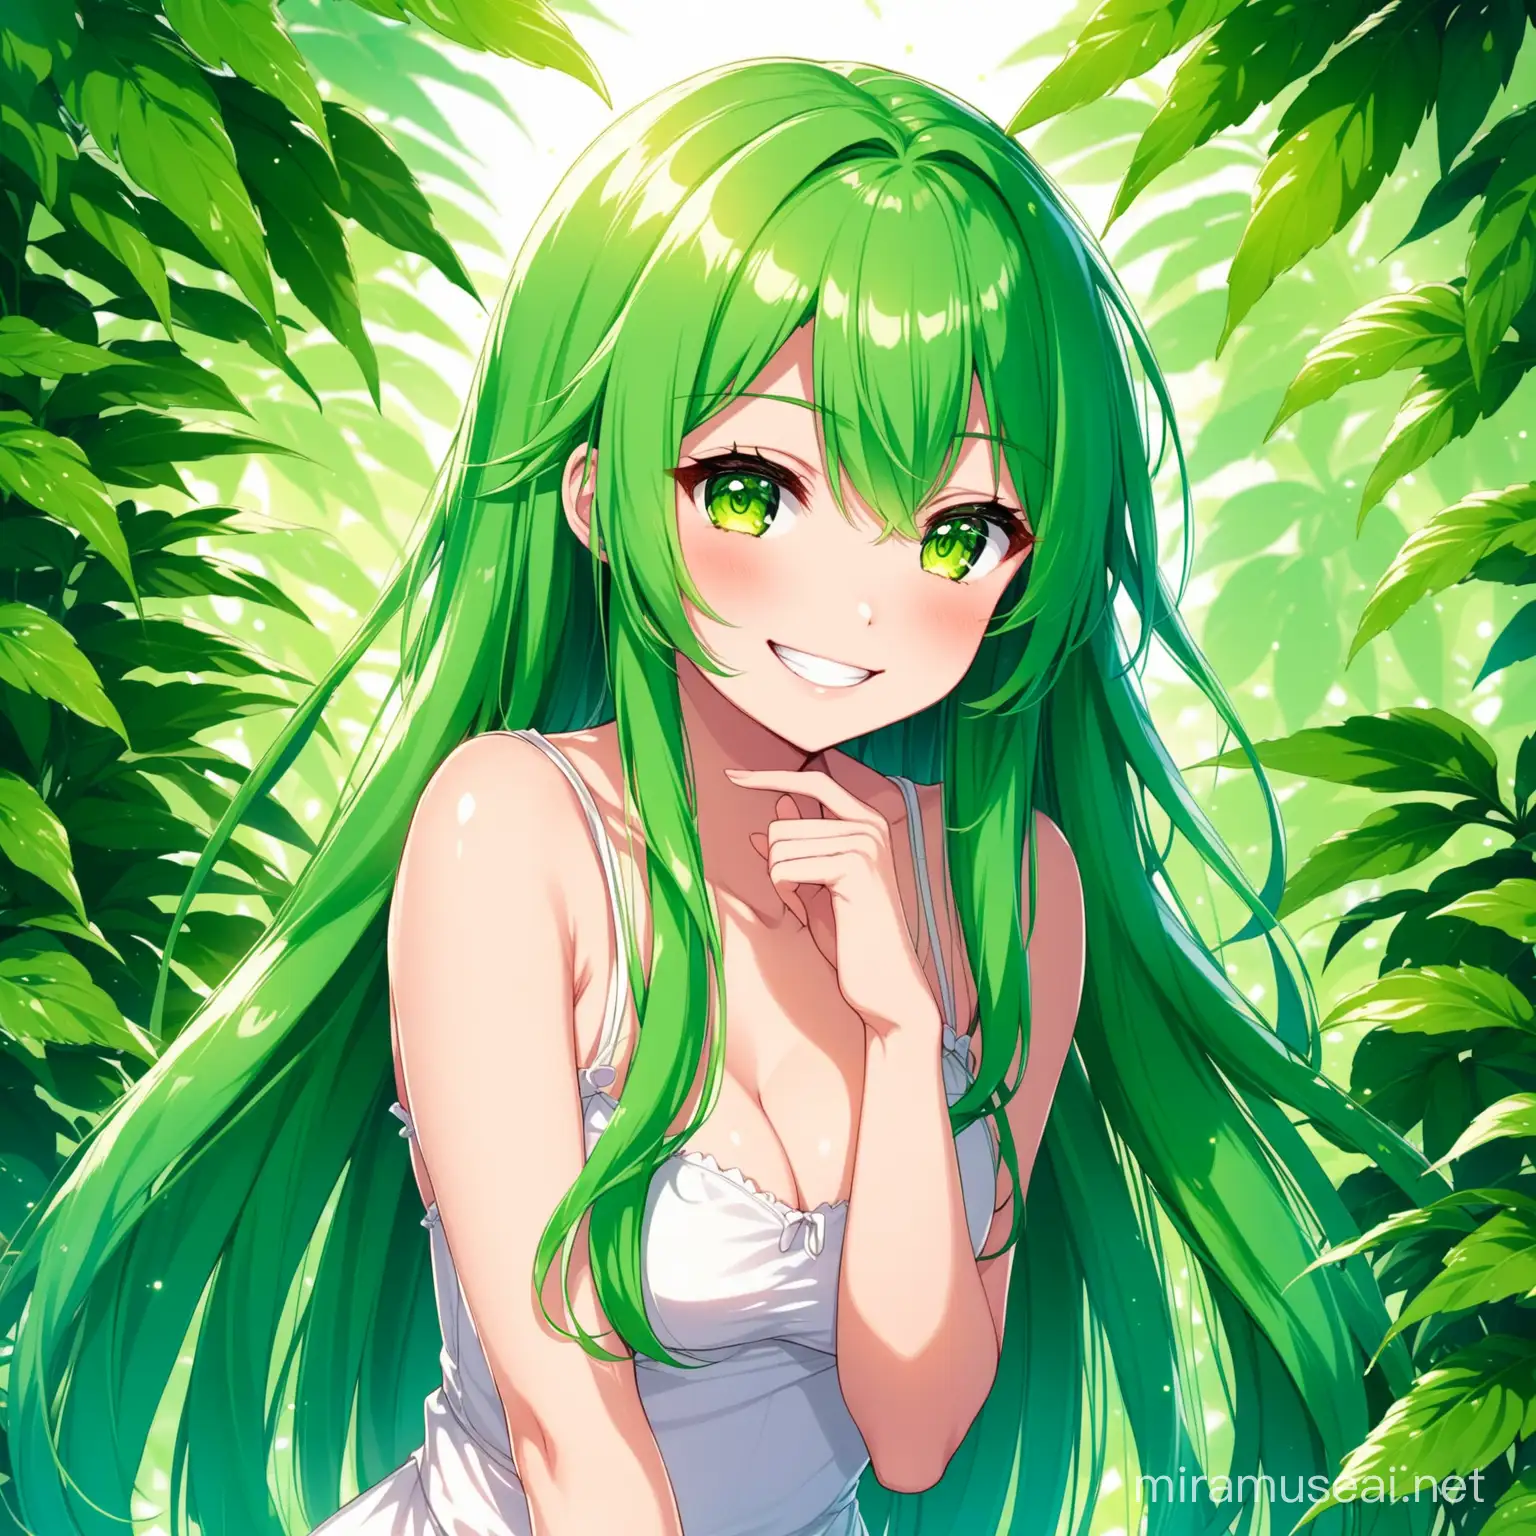 Playful Anime Girl with Long Green Hair in Botanical Setting